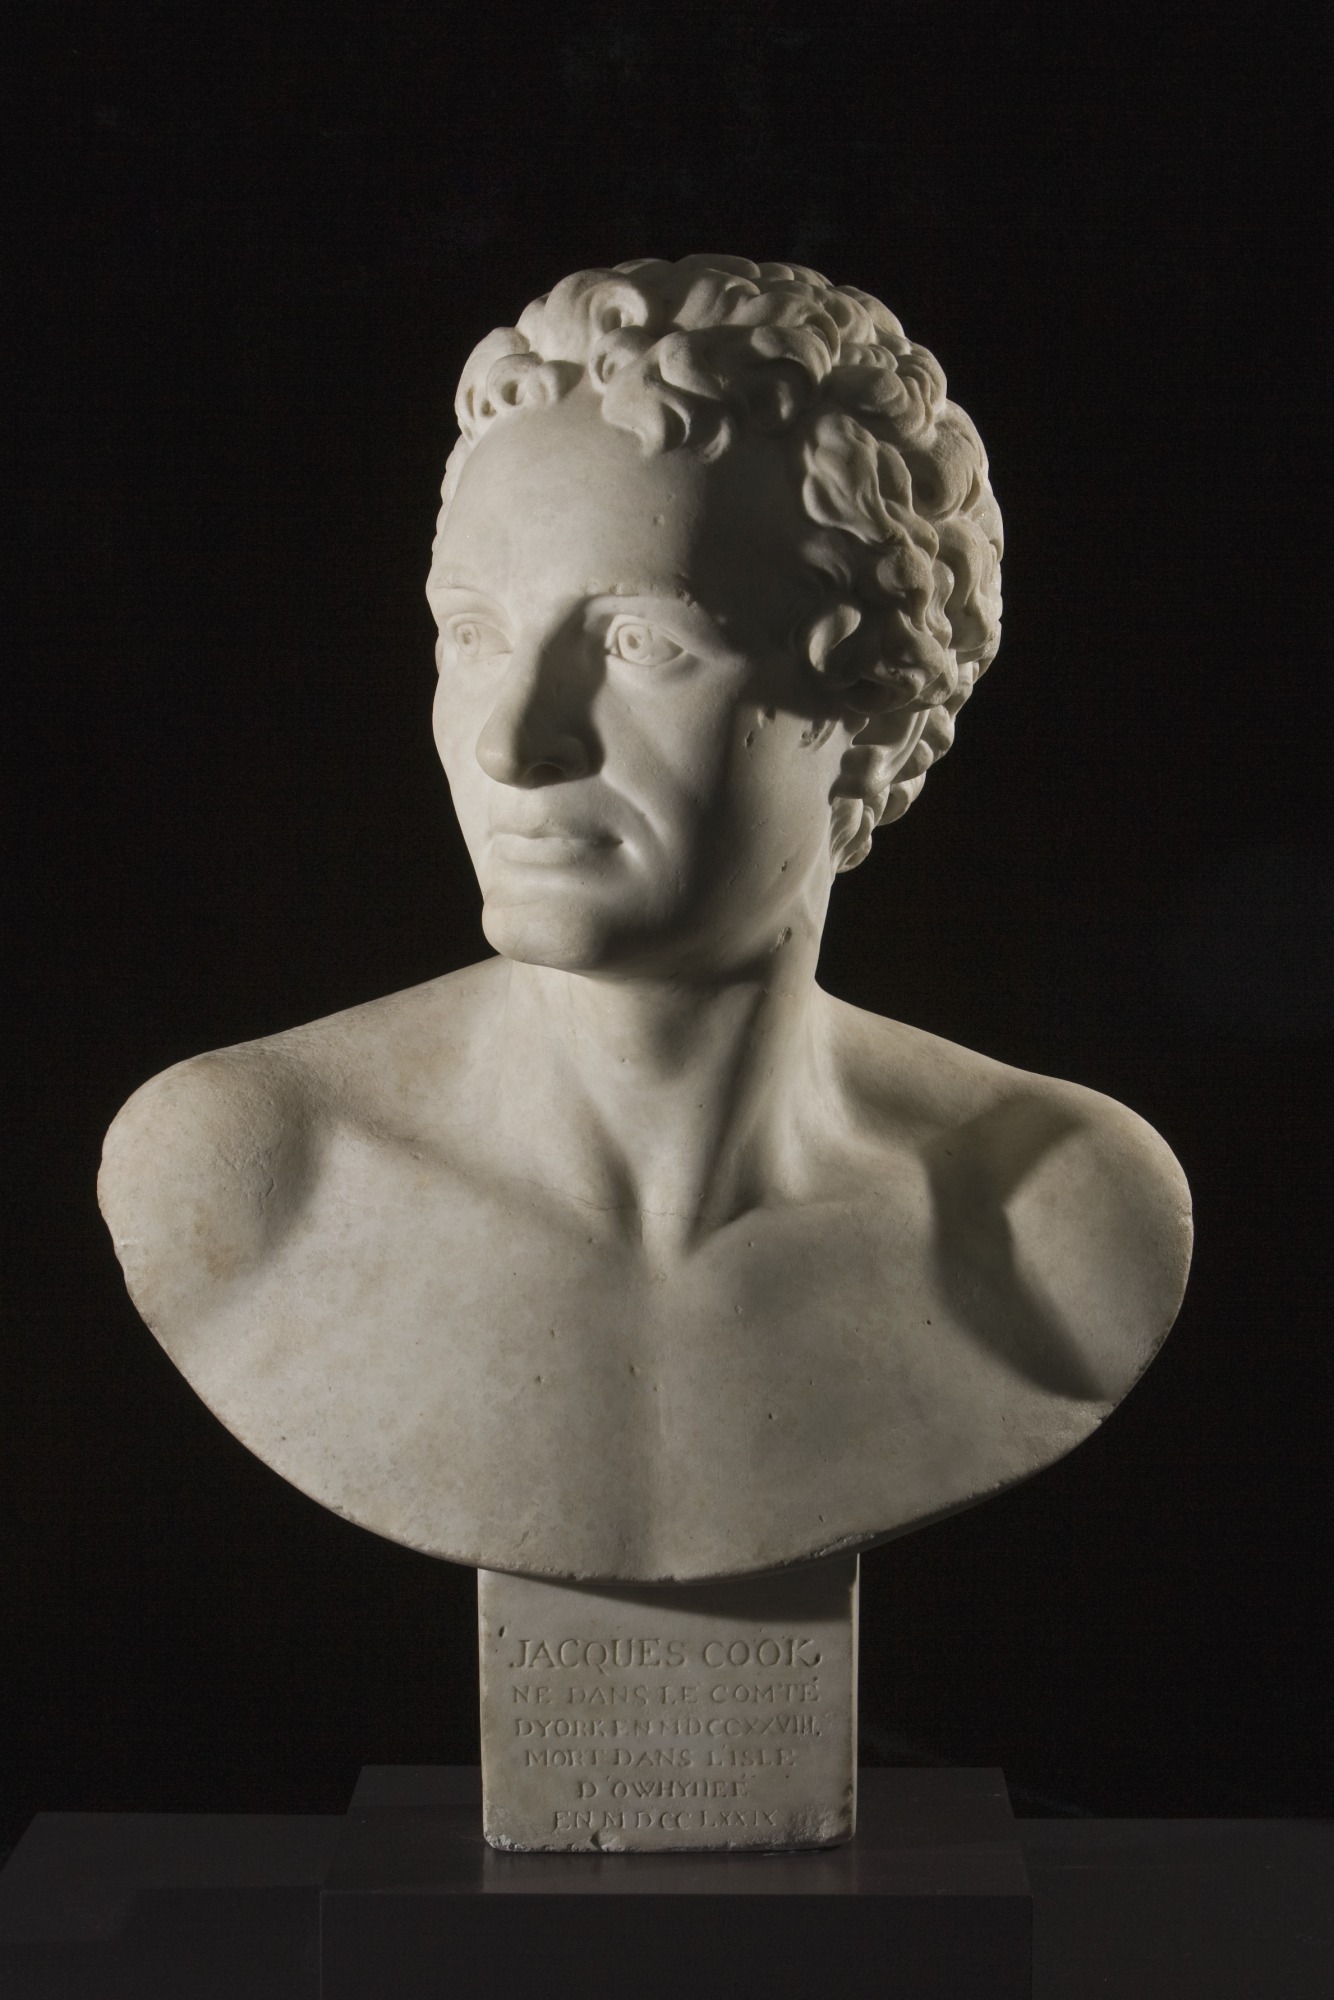 French marble portrait bust of Captain Jacques Cook, 1788.